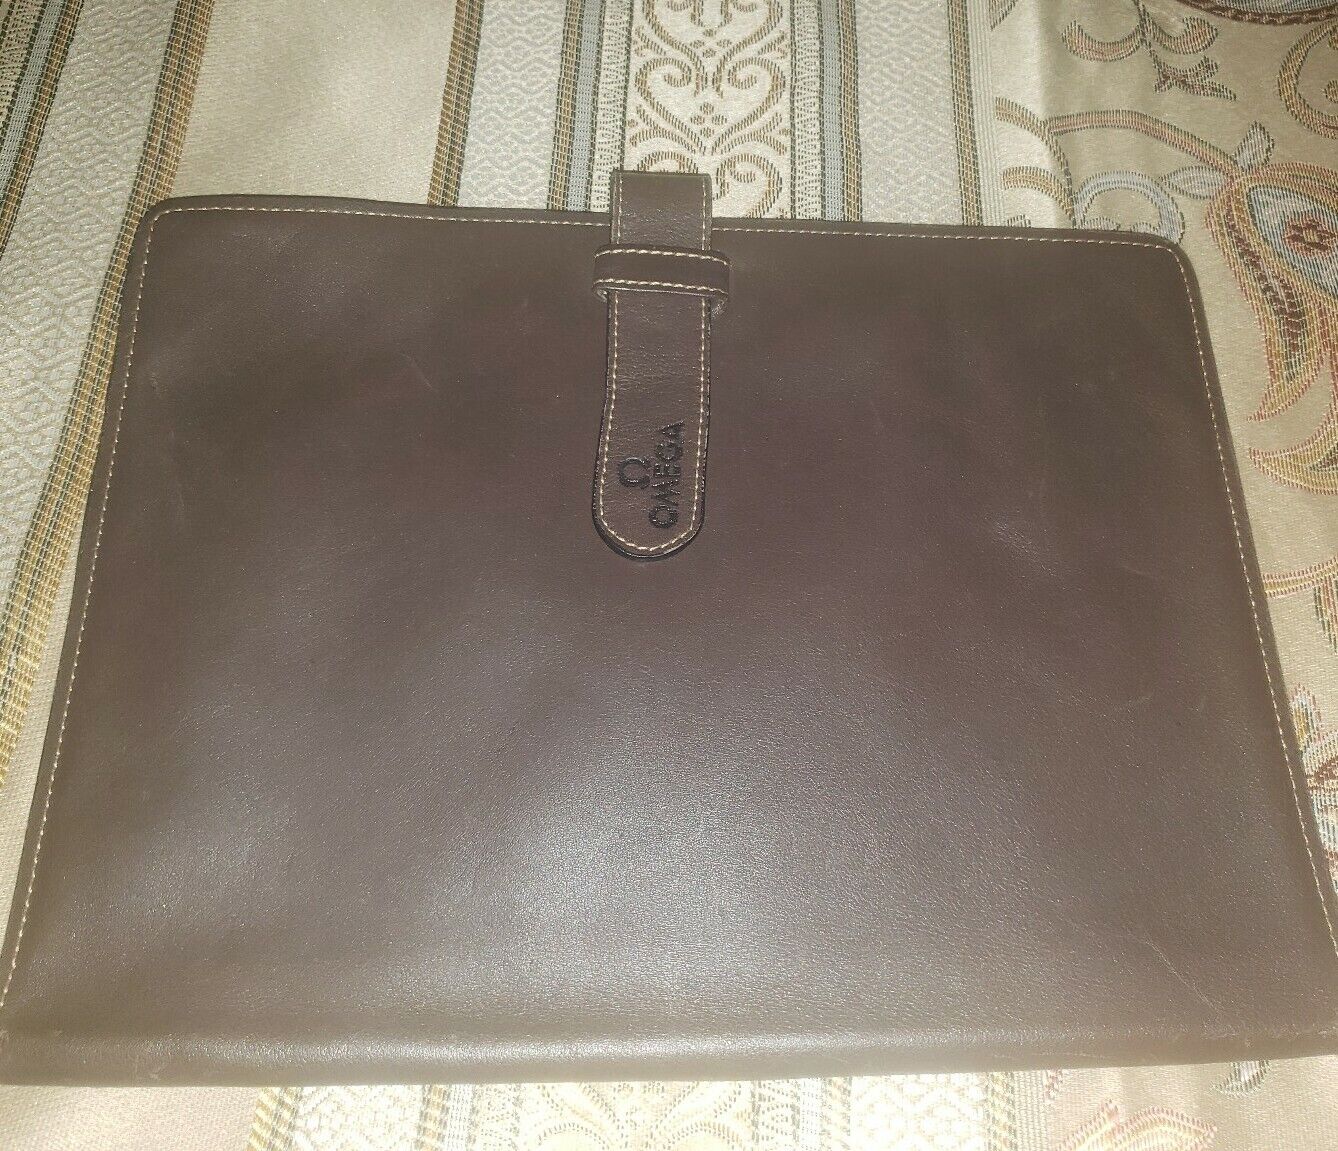 Authentic Omega Watch (Made In Italy)  Brown Leather iPad Case $540